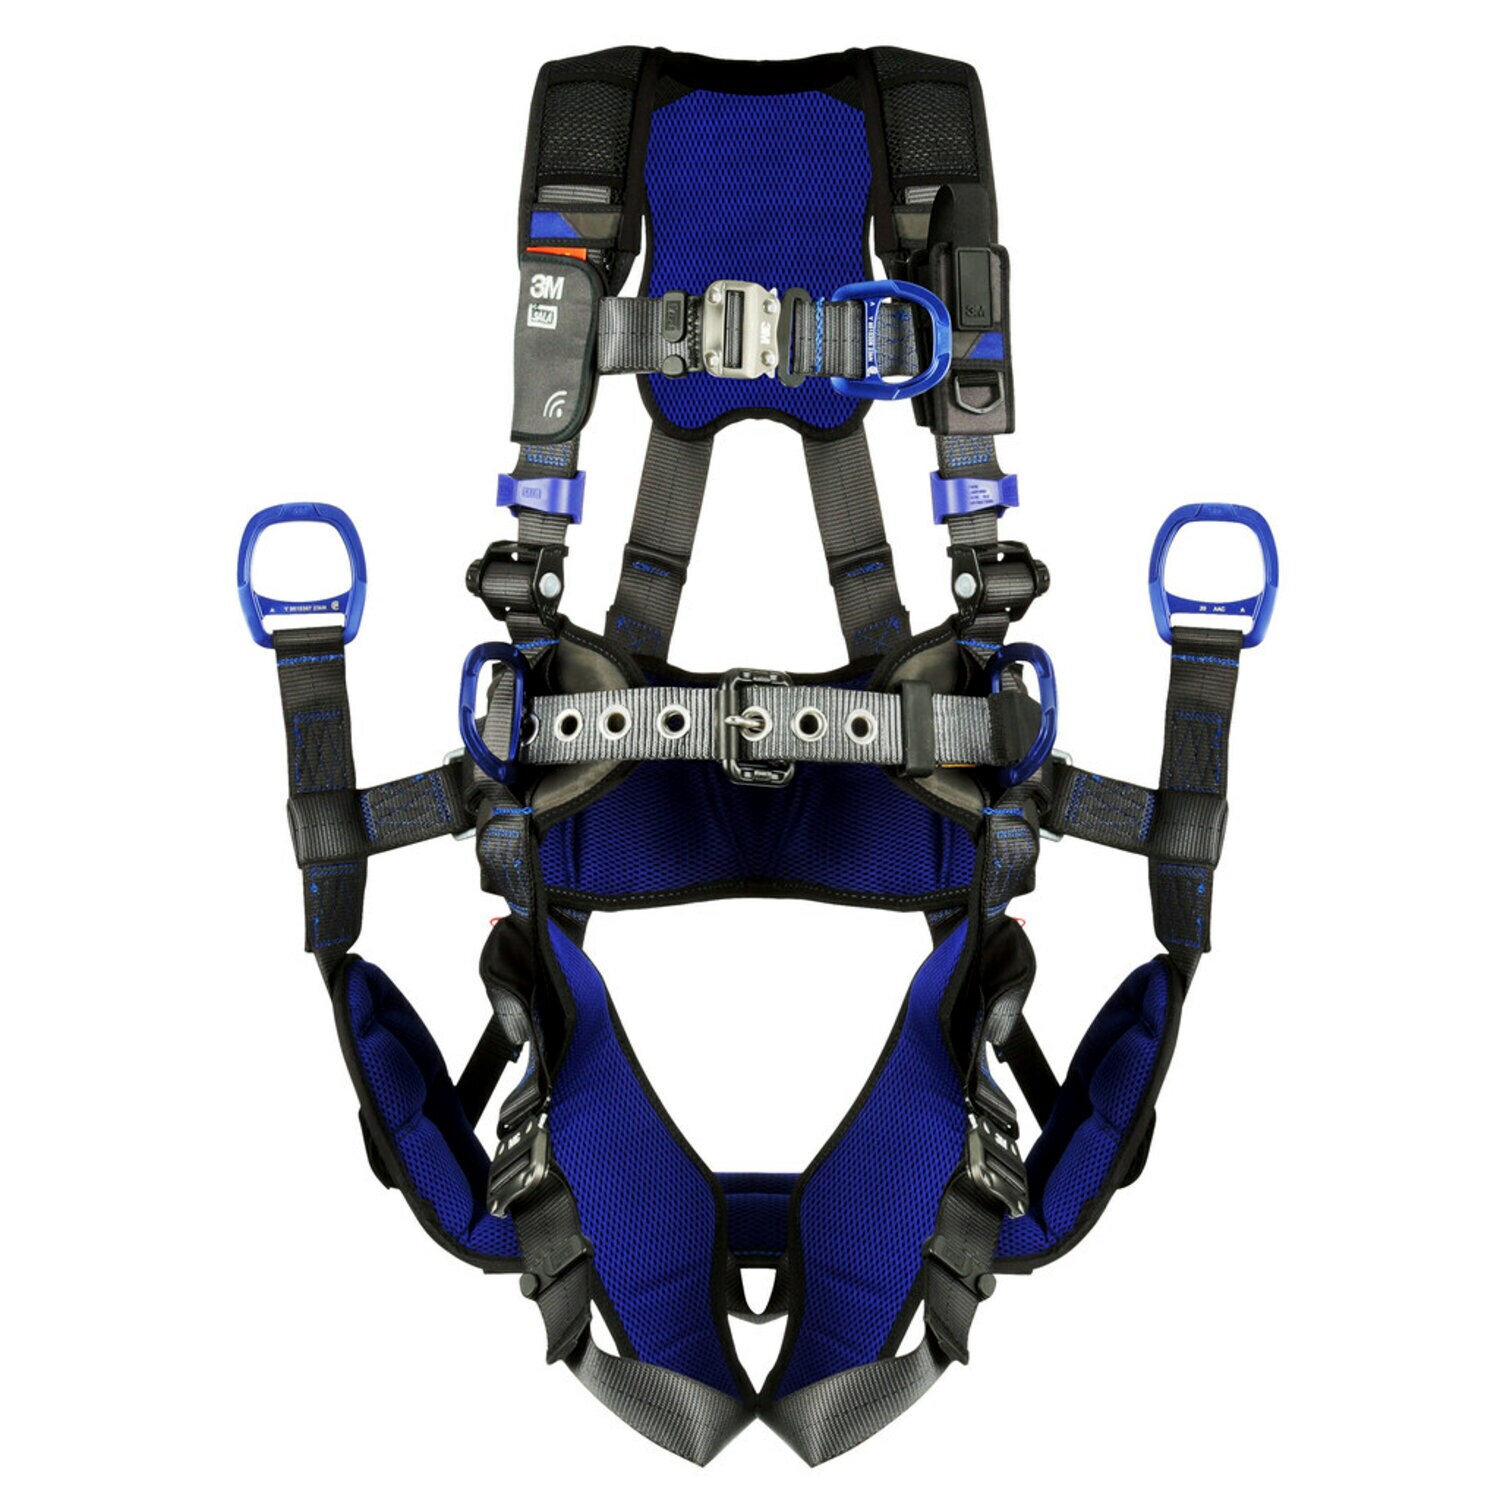 7100188764 - 3M DBI-SALA ExoFit X300 Comfort Tower Climbing/Positioning/Suspension Safety Harness 1113190, Small